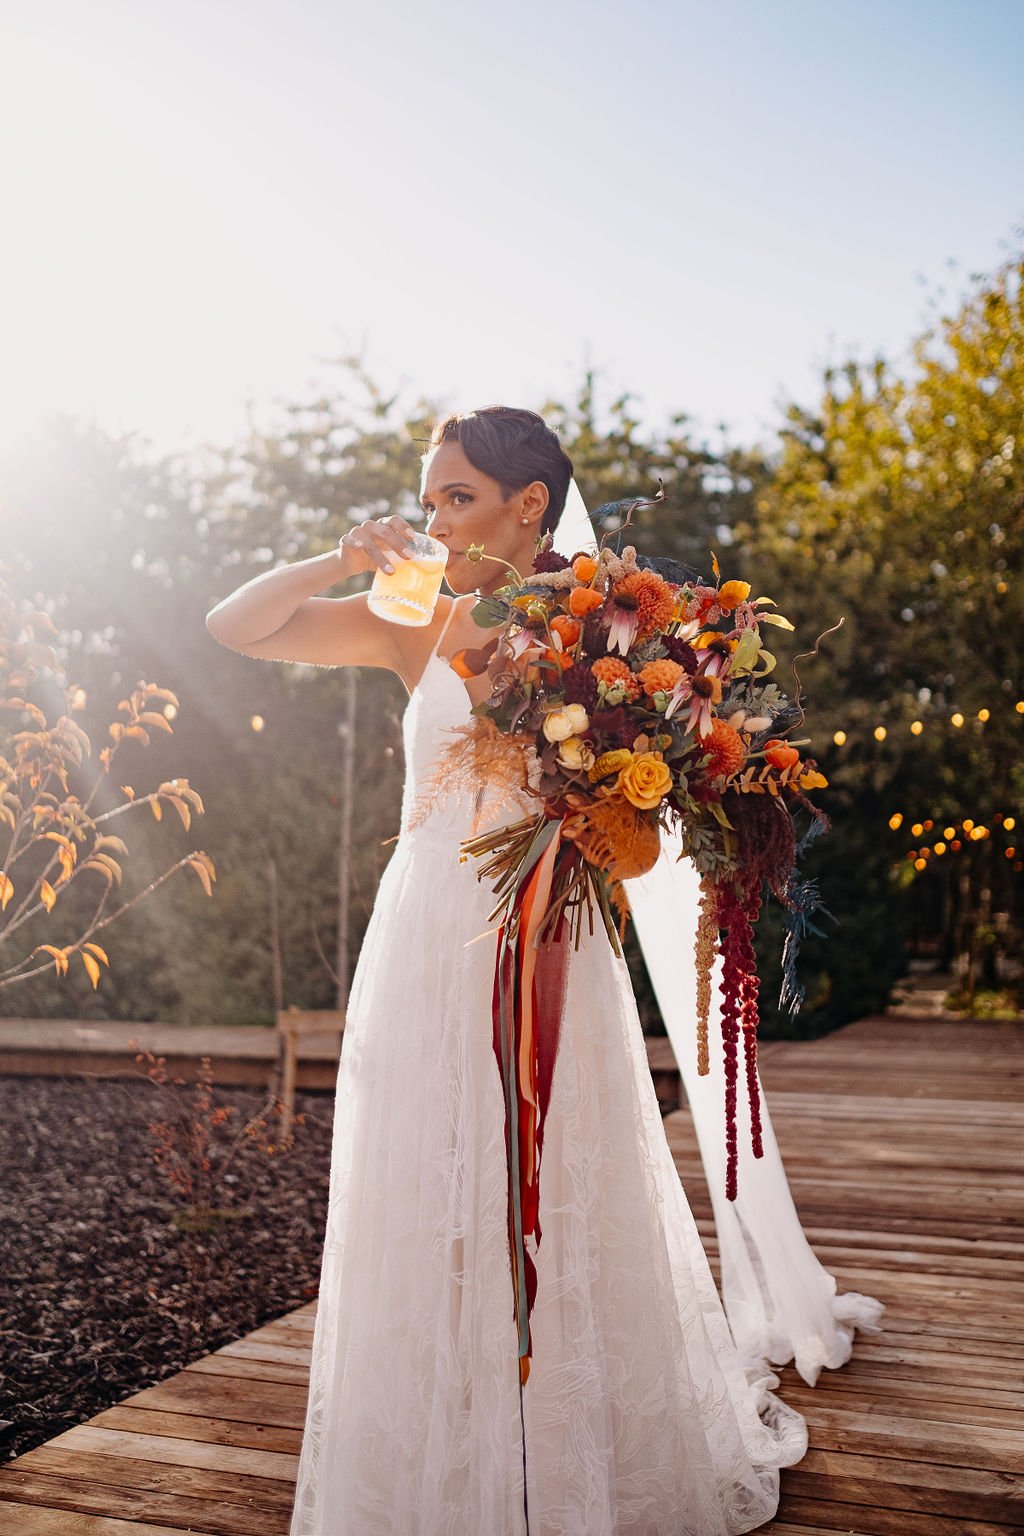  A bride stood outside in the sunshine having a drink whilst holding her epic floral creation. The fun and bright hand-tied bridal bouquet is filled with natural, dyed and dried florals and foliage and the creative design is completed with the quirky